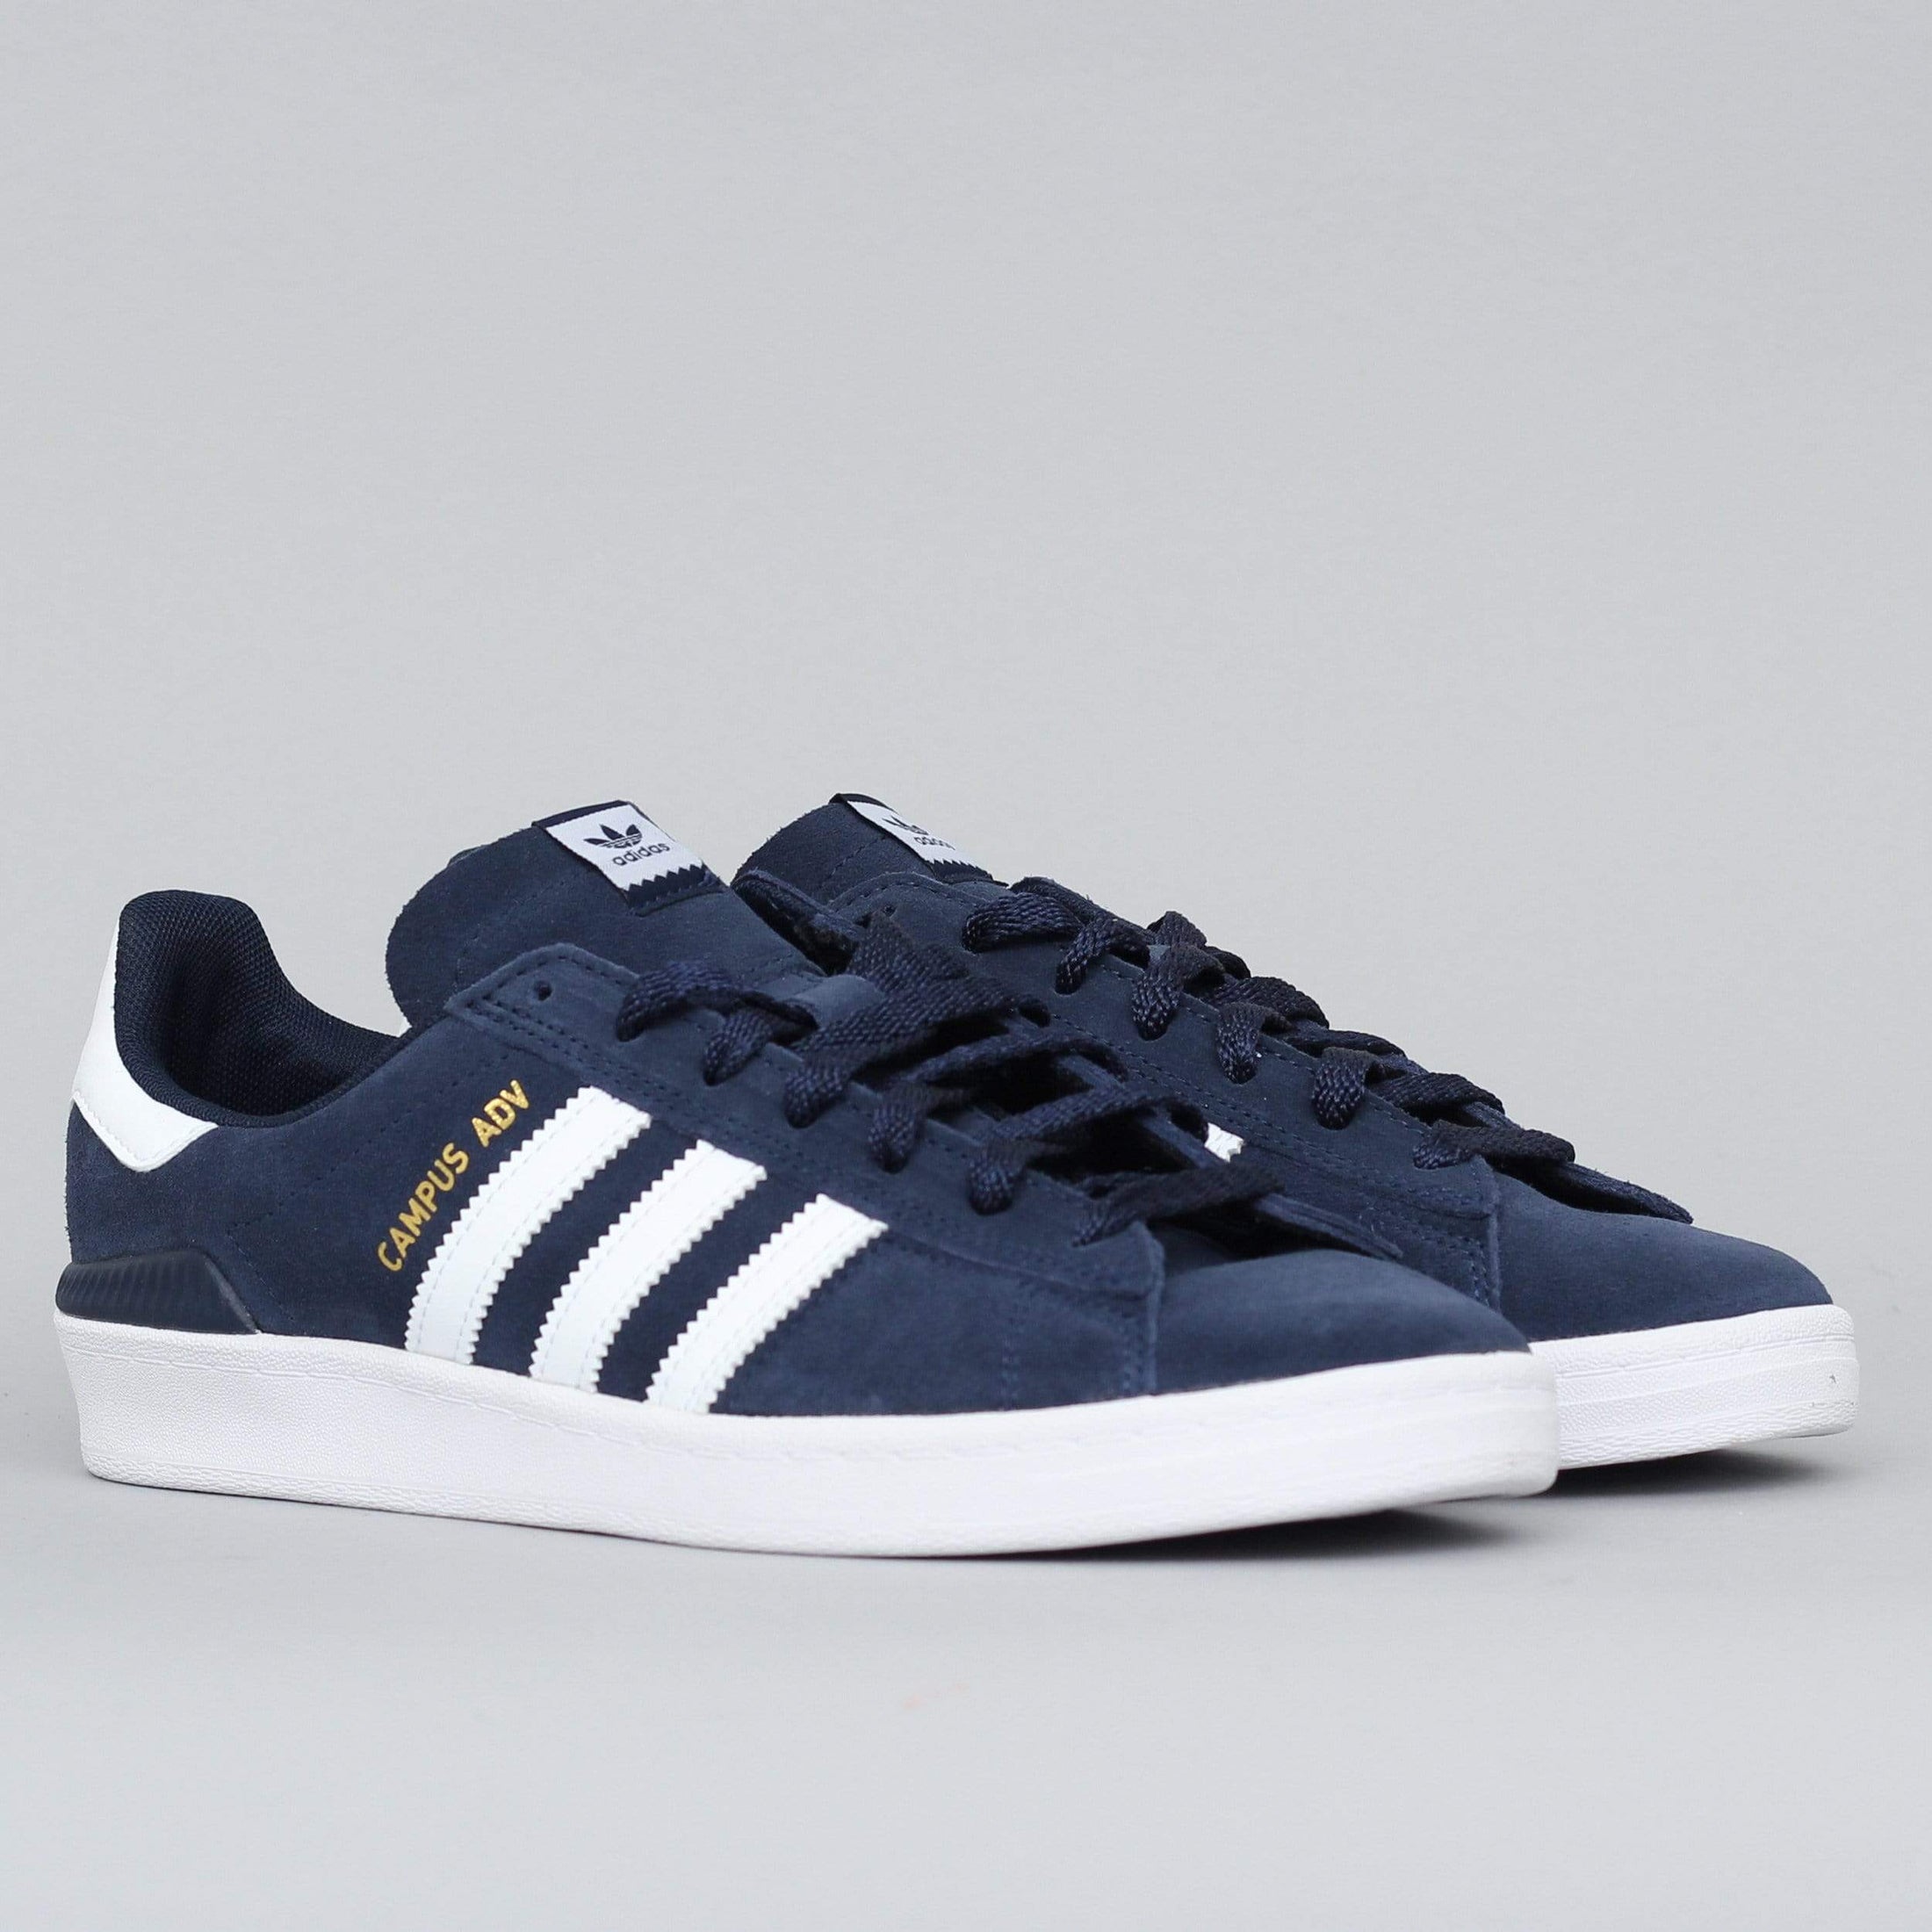 adidas Campus Advance Shoes Collegiate Navy / Footwear White / Footwear White